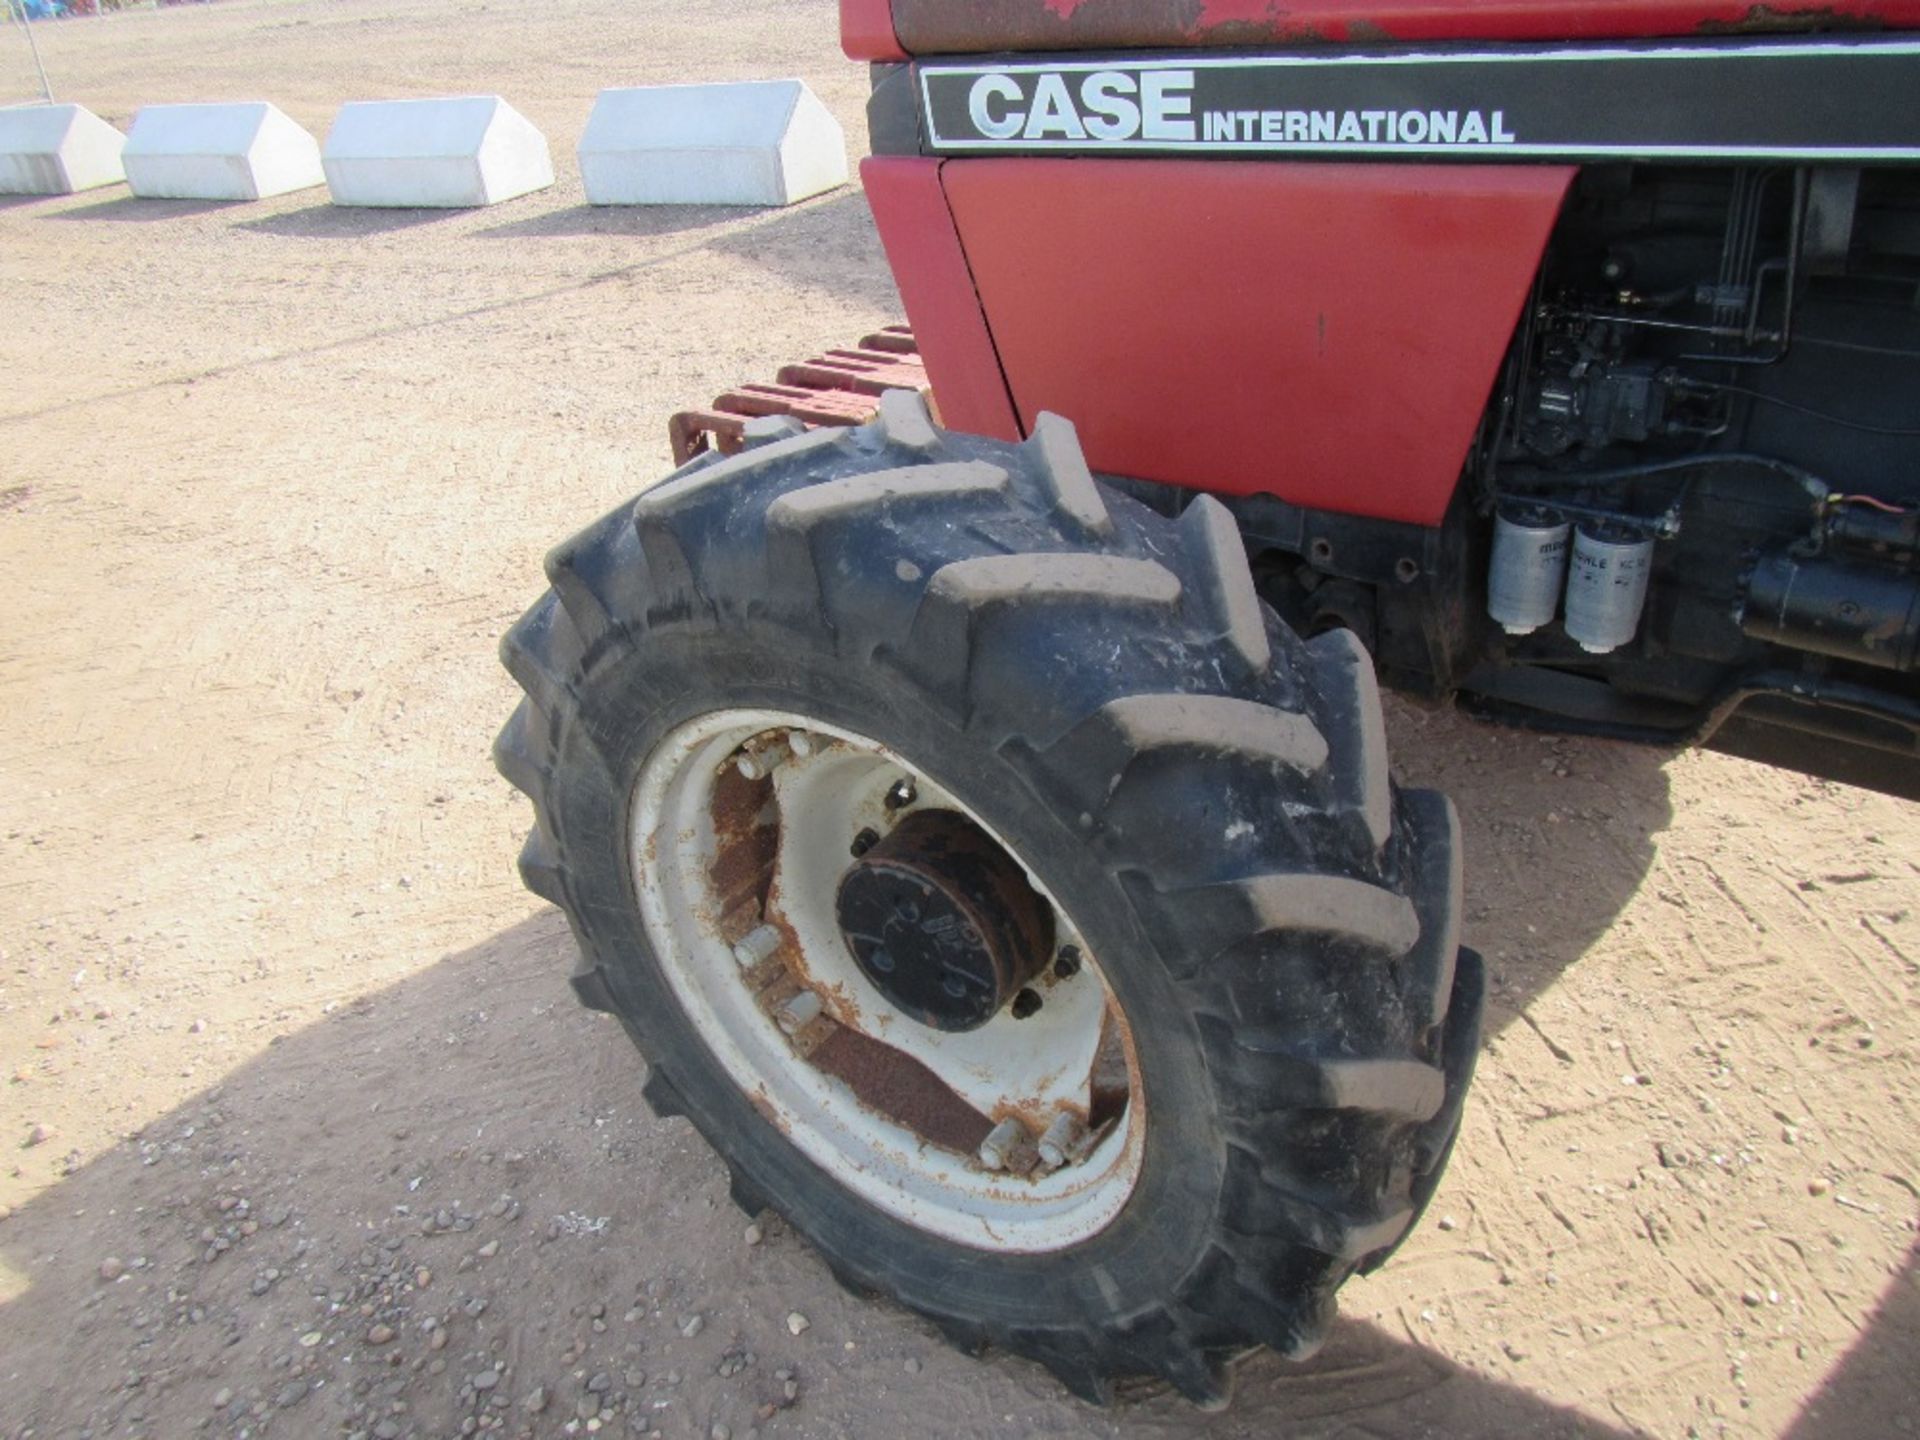 1992 Case International 844XL 4wd Tractor Reg. No. K394 PPV - Image 11 of 15